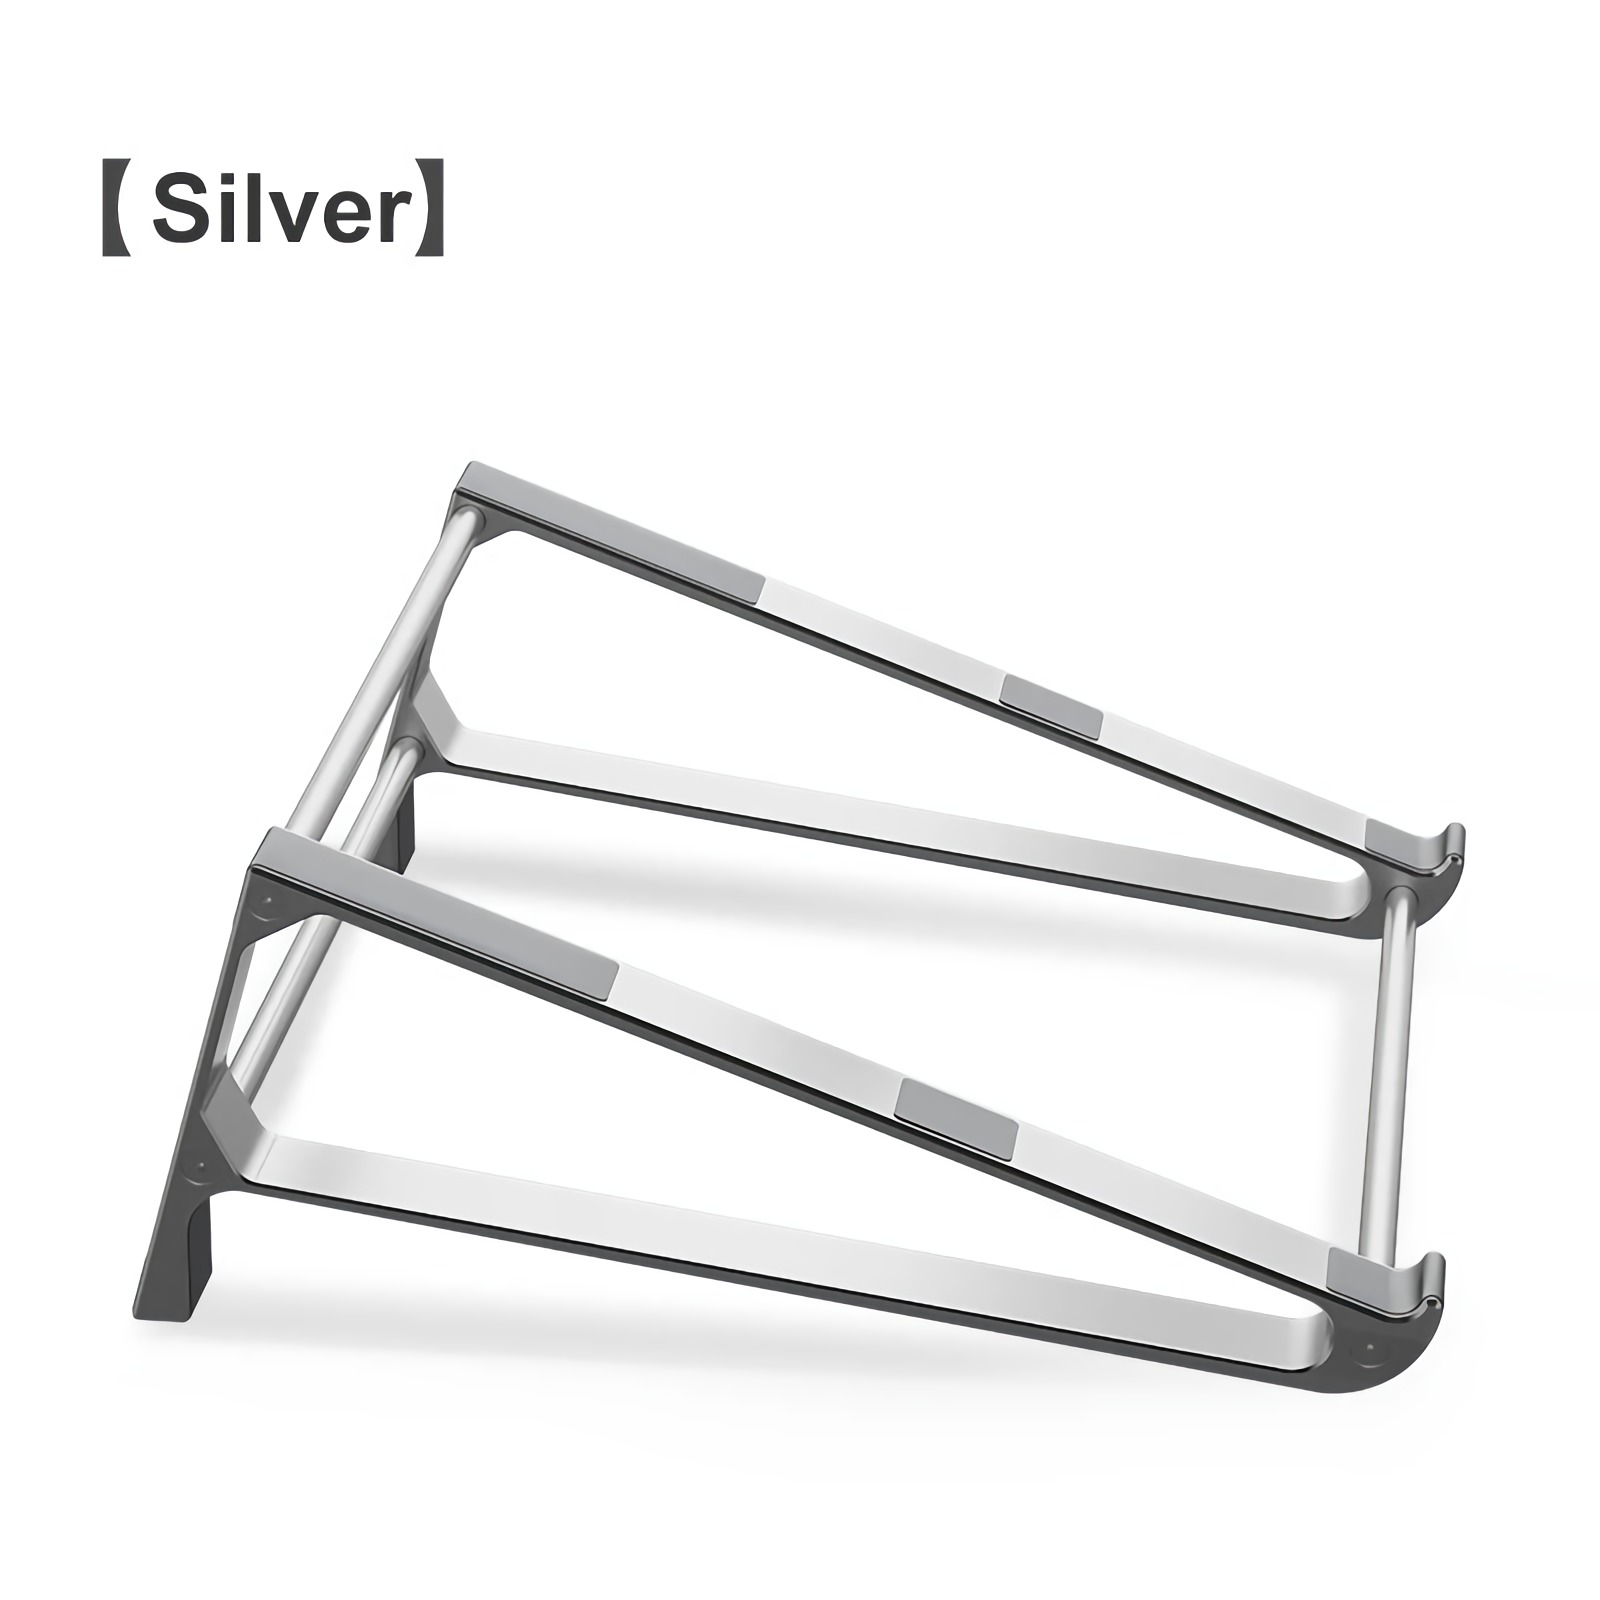 Aluminium Alloy 2 in 1 Vertical Stand Laptop Stand Tablet Holder Desk Mobile Phone Stand For 17